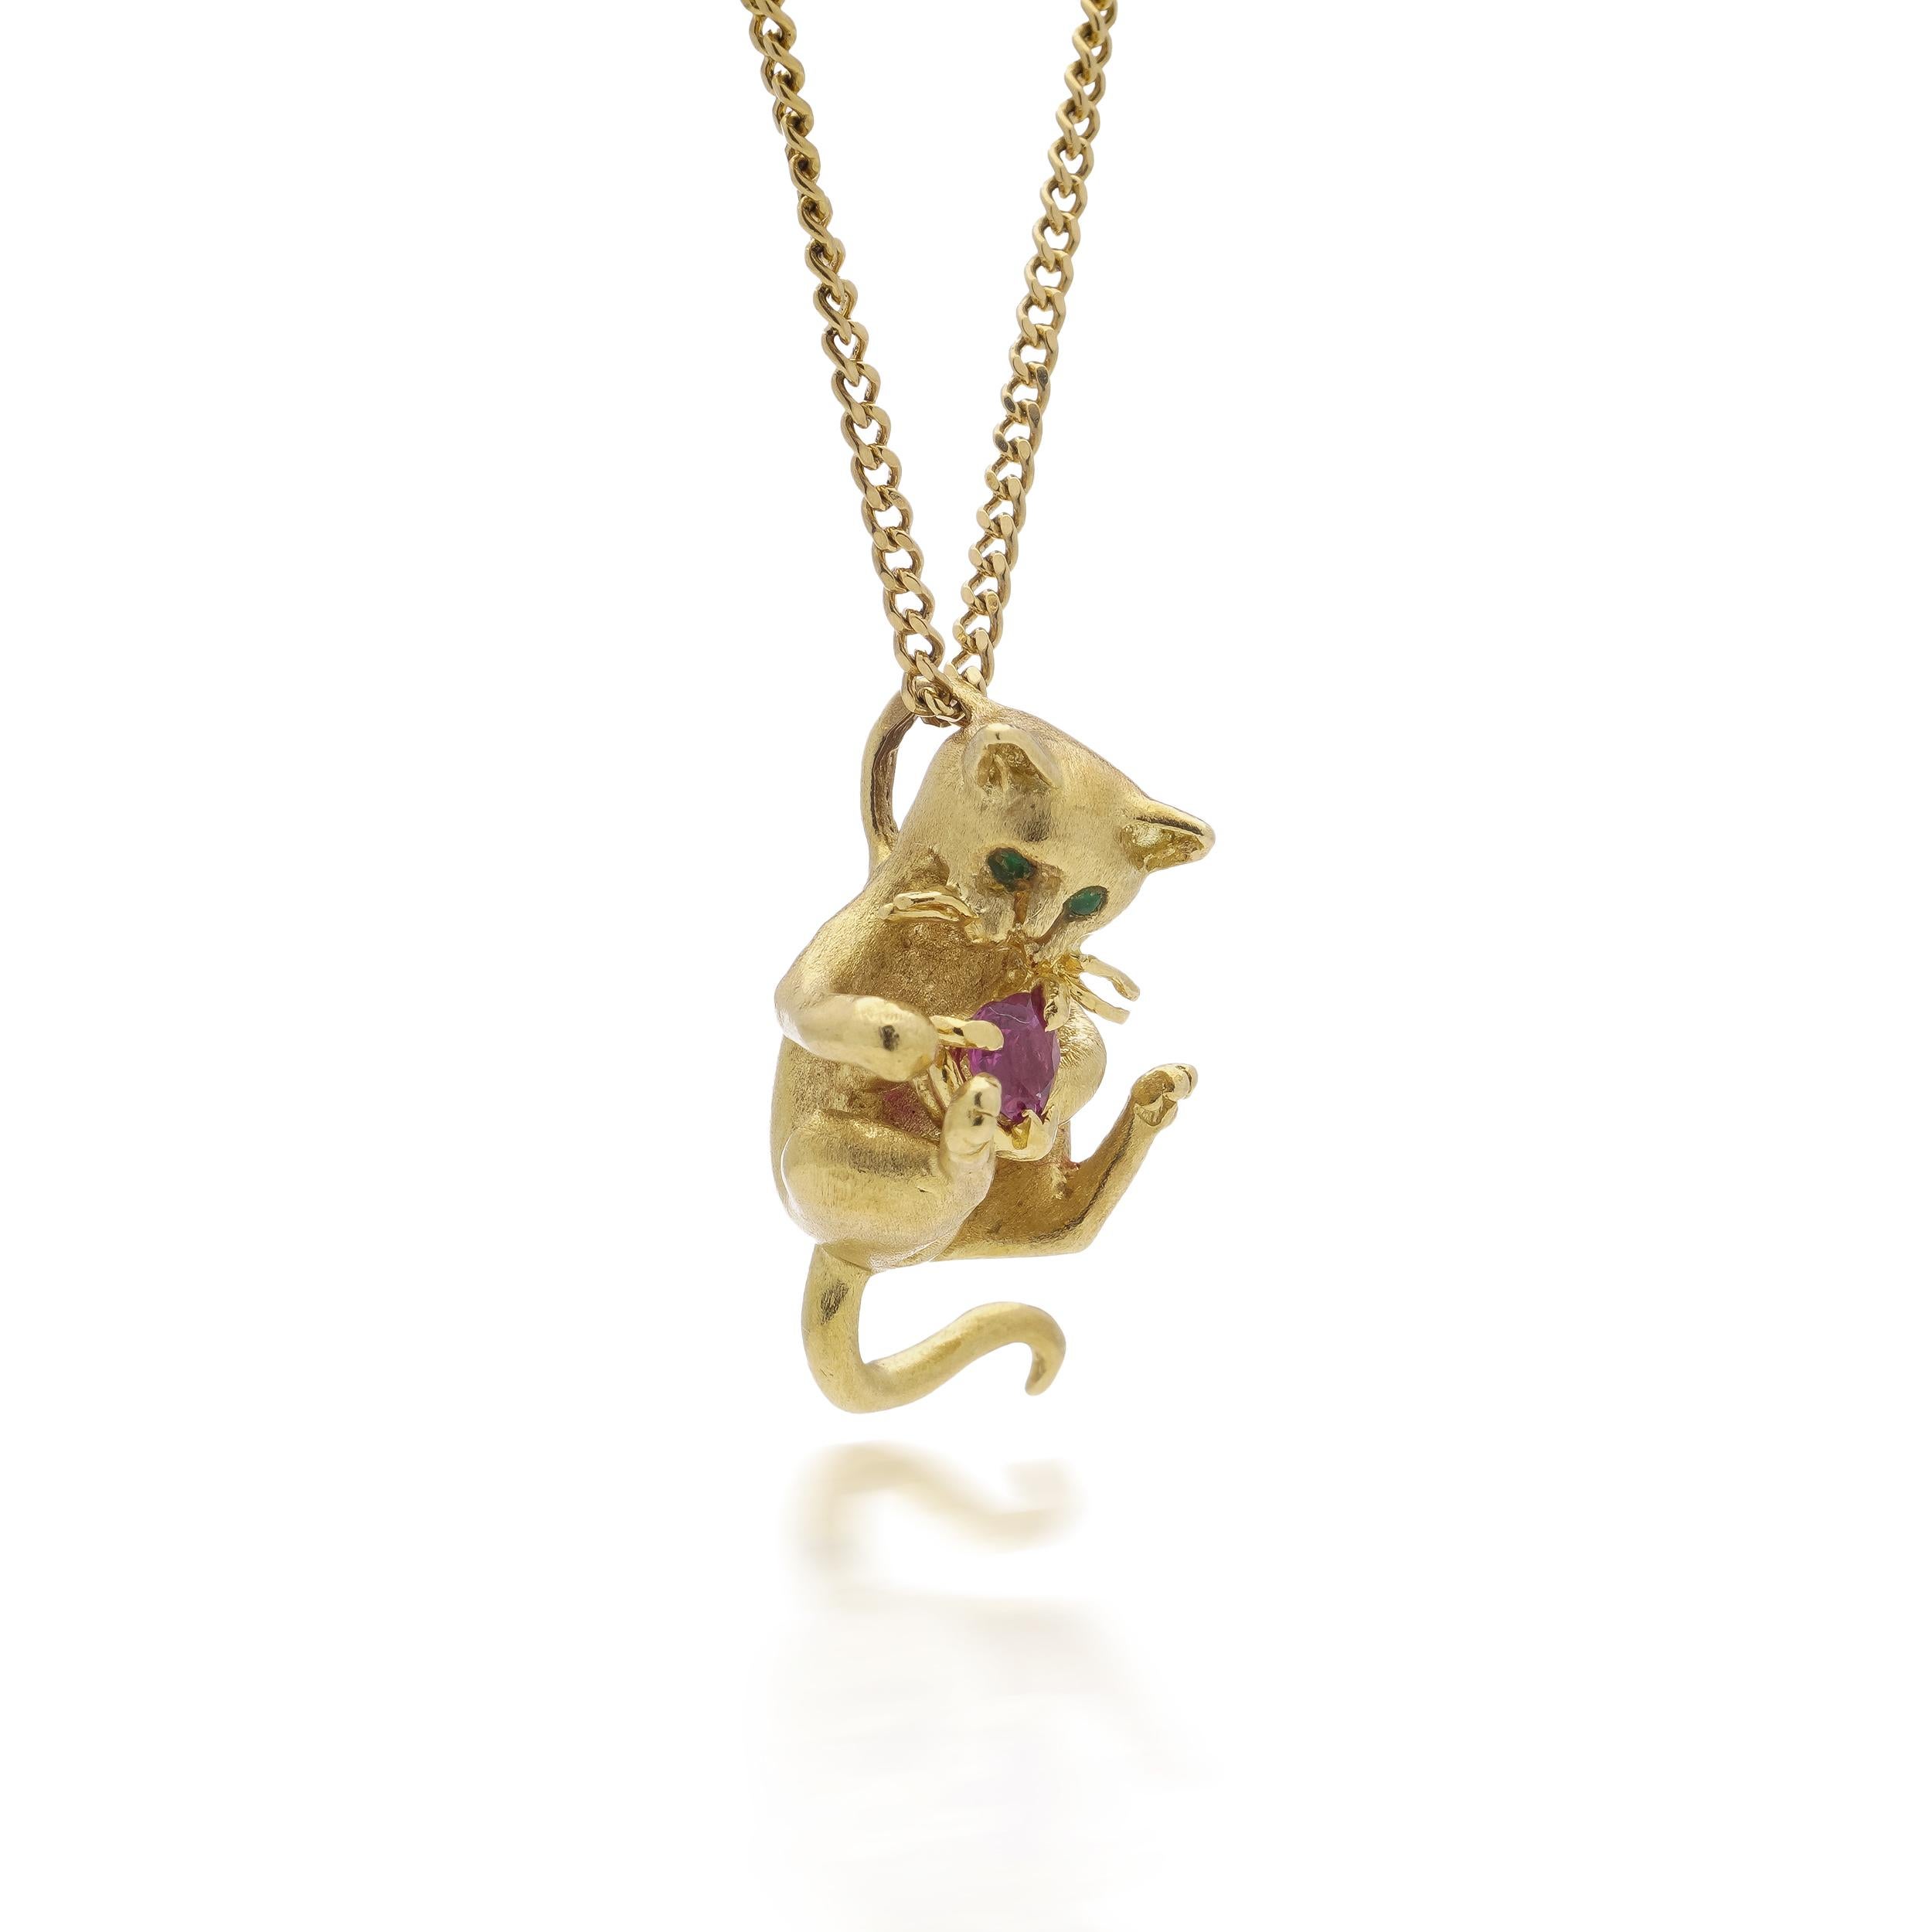 Heart Cut Fred Paris 18kt. yellow gold chain necklace with kitty holding ruby pendant